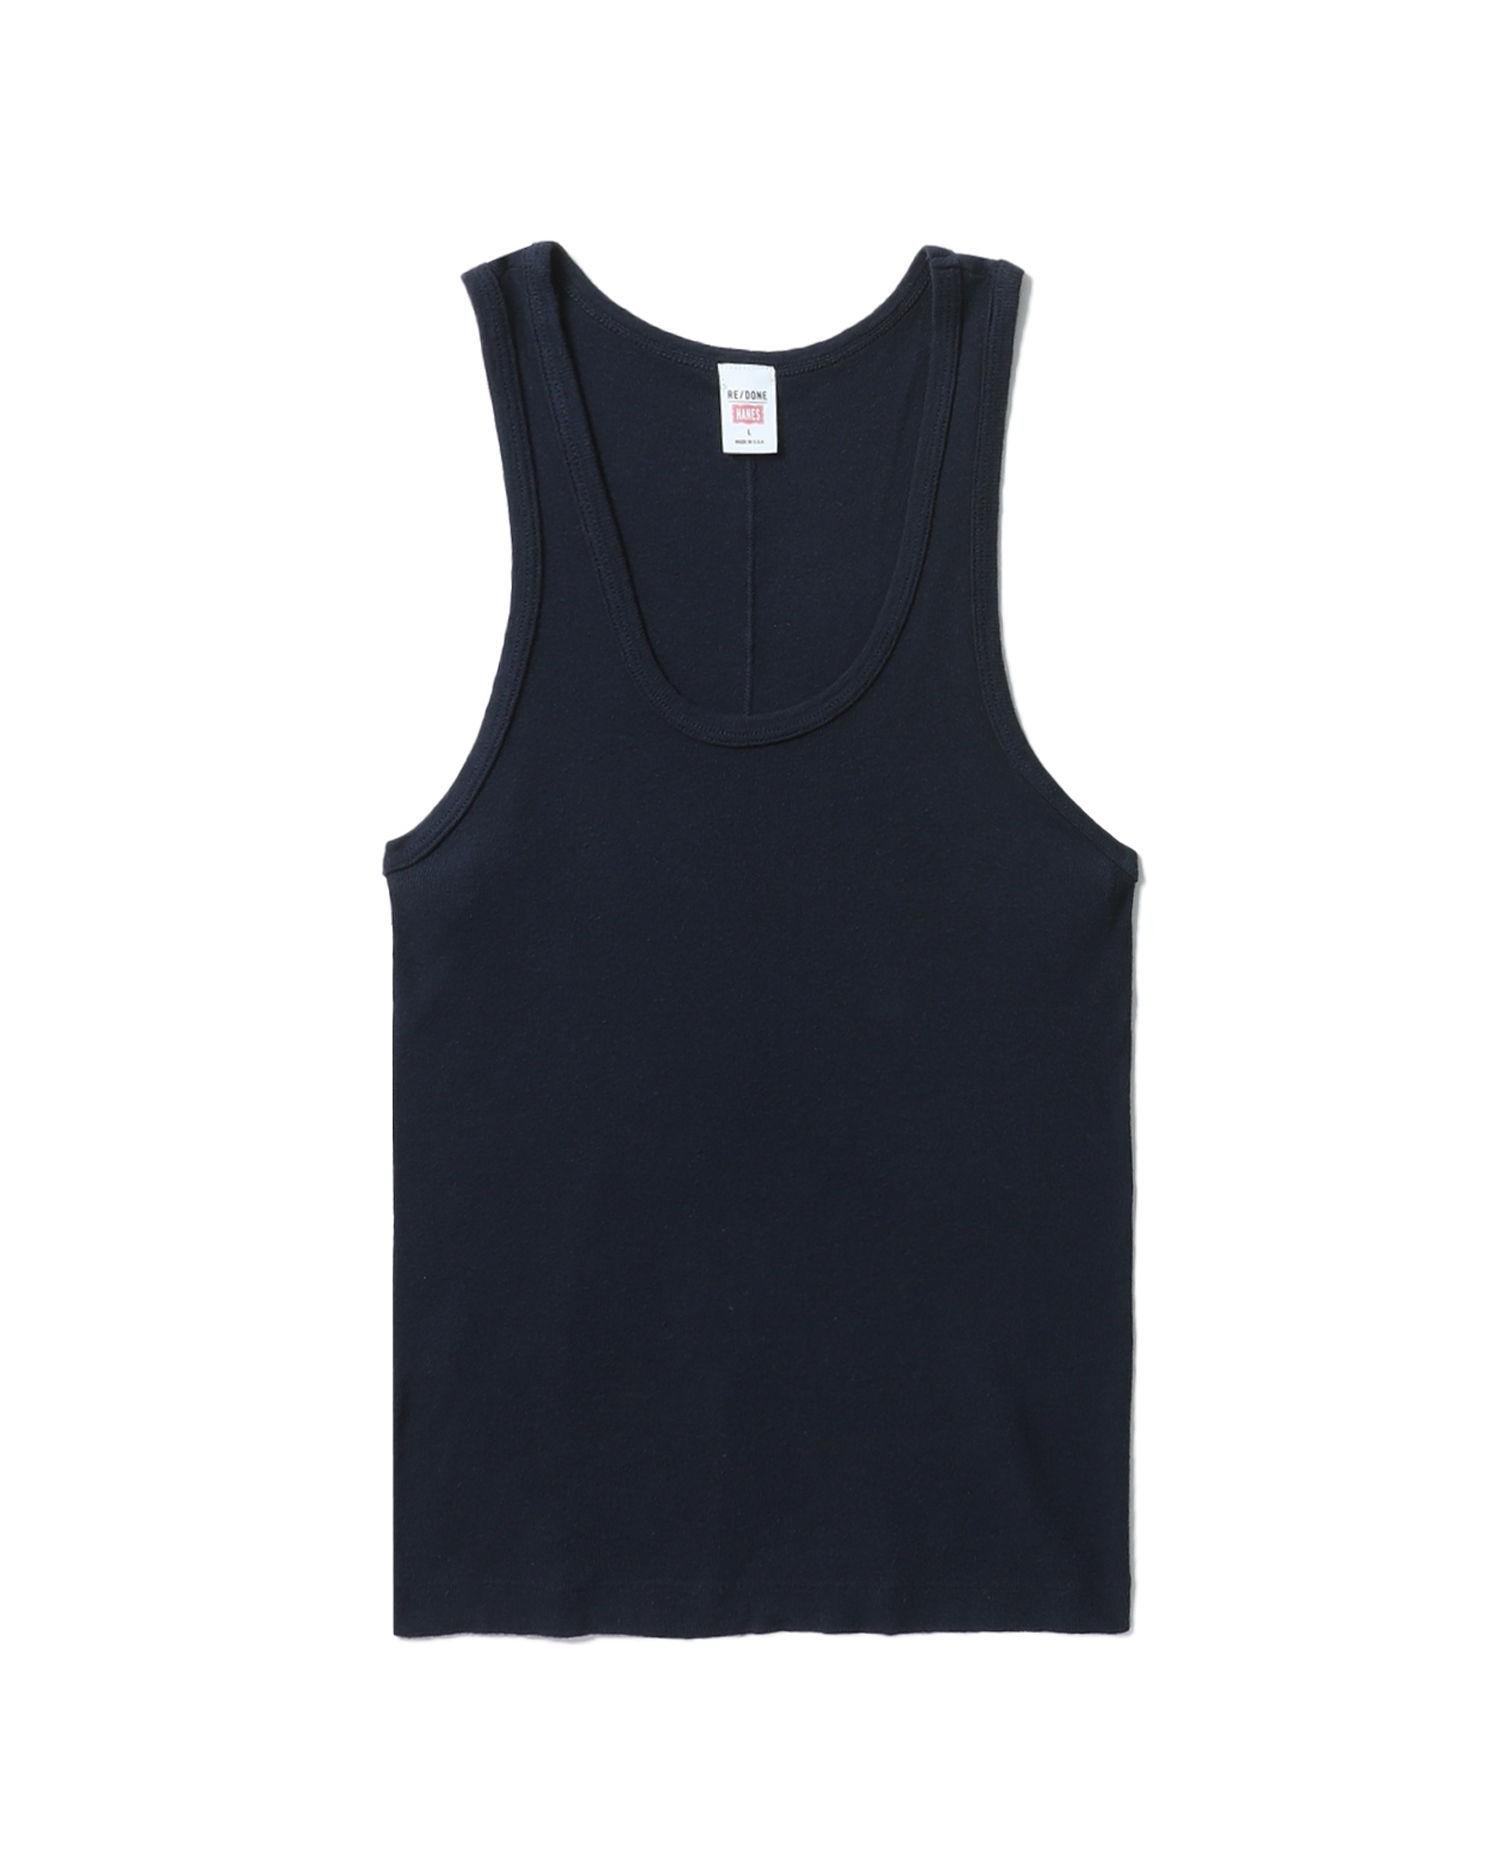 Slim-fit tank top by RE/DONE